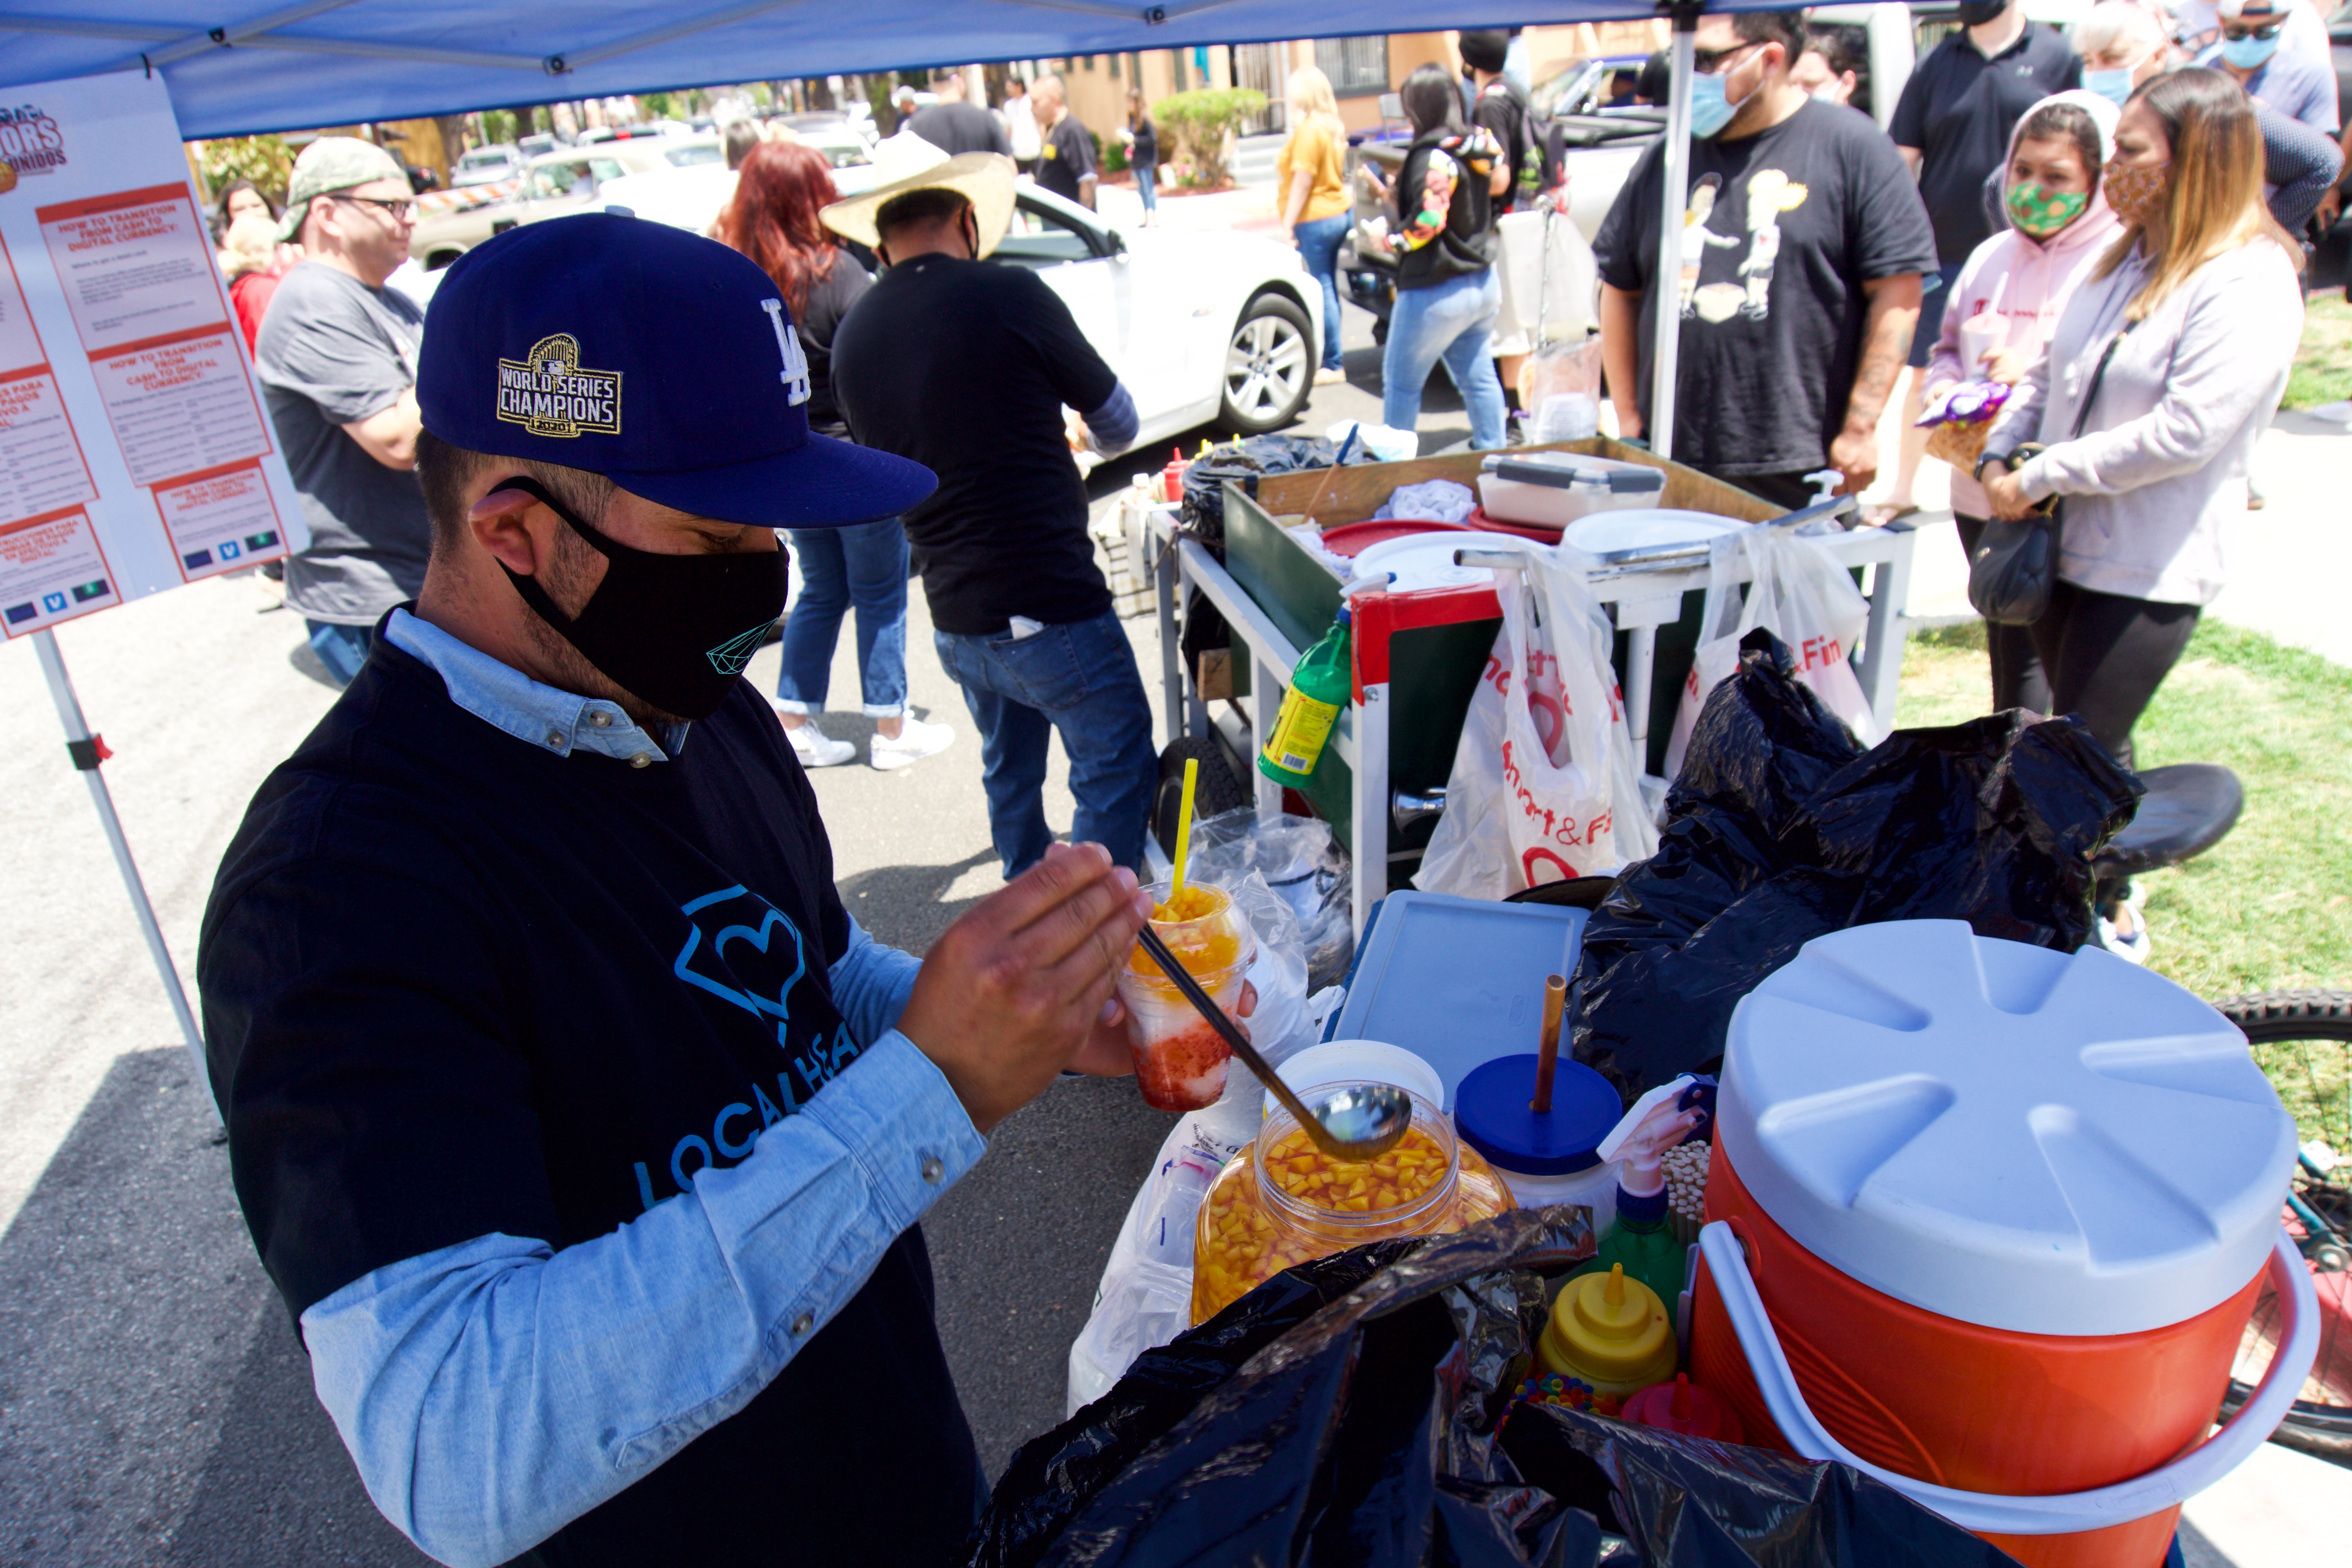 José Eugenio Vivanco serves his famous raspados to the community of Long Beach who came out to support two vendors after they were harassed earlier in the week.